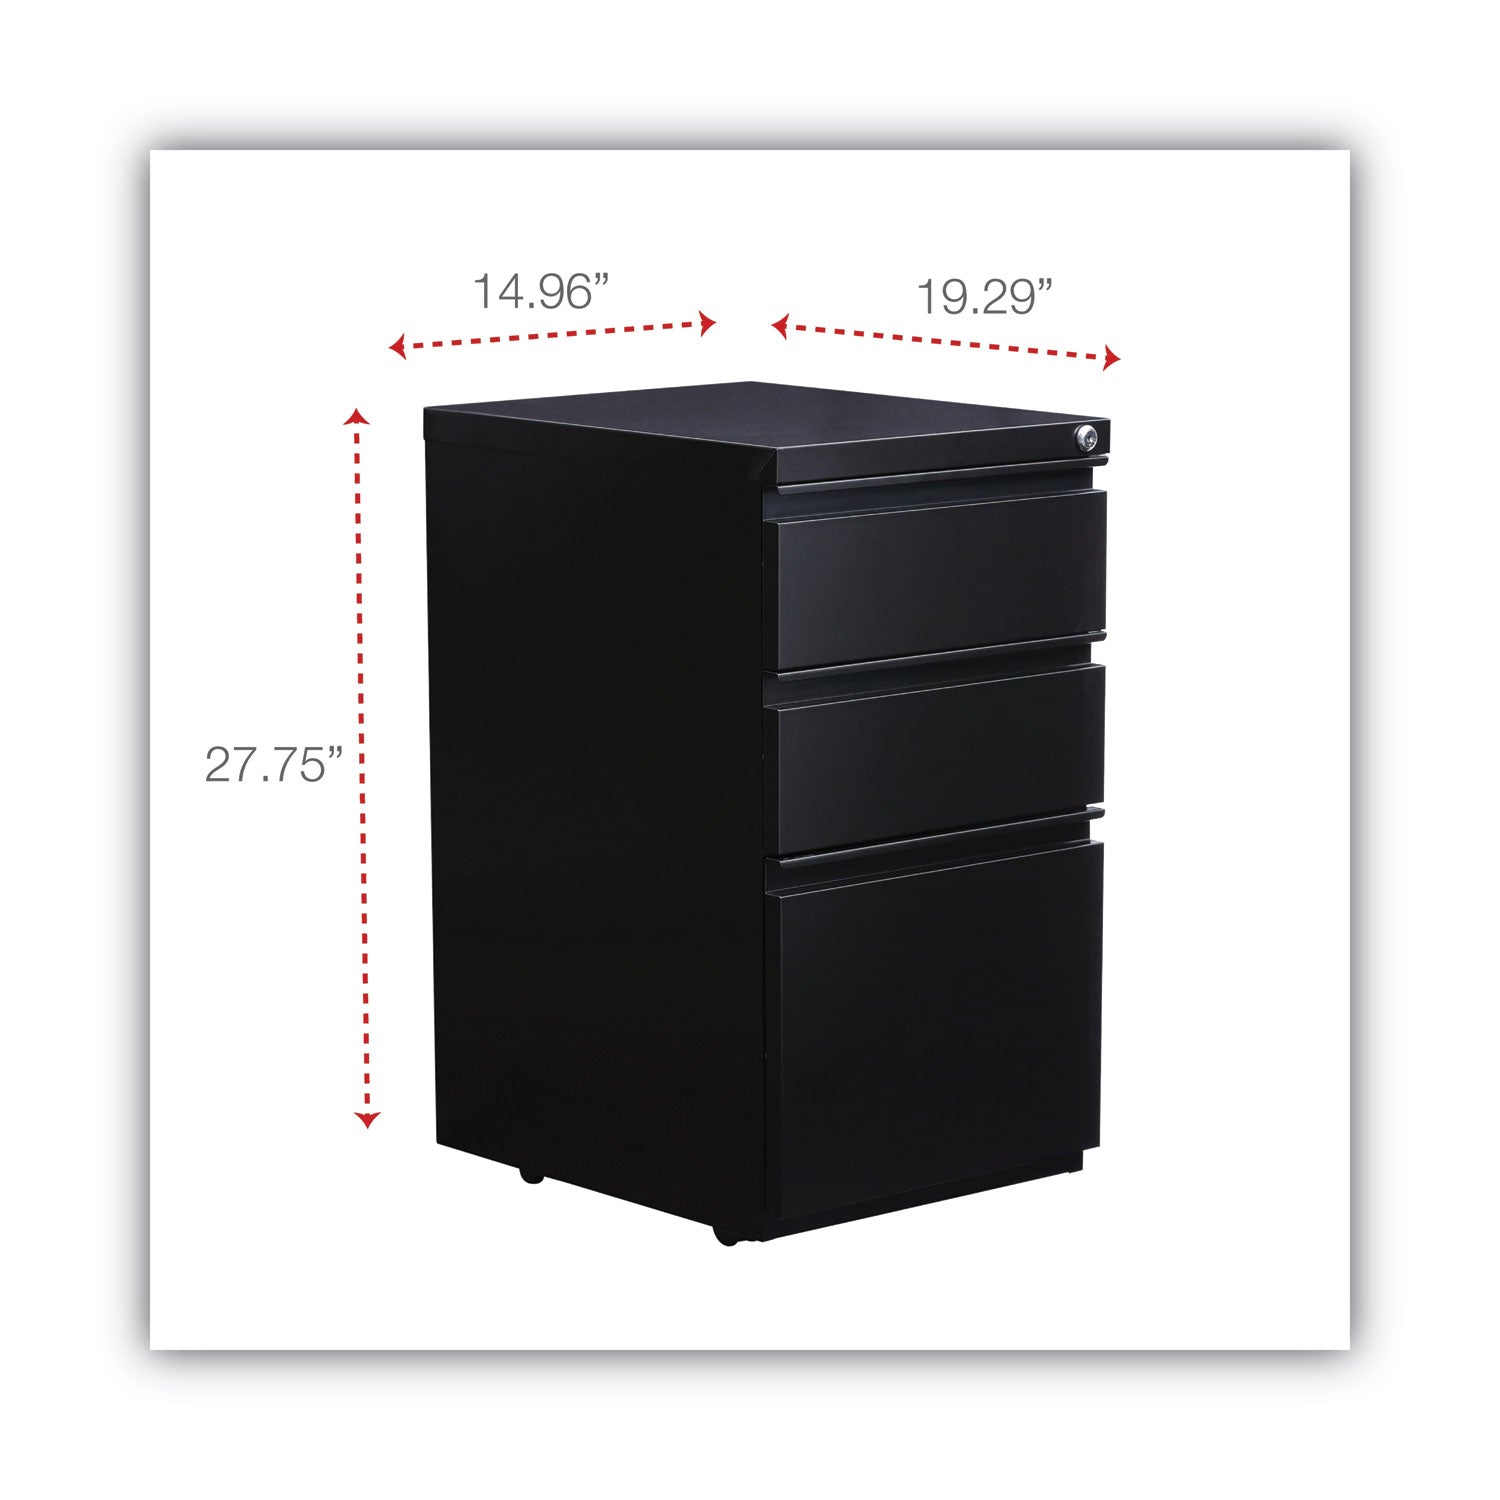 file-pedestal-with-full-length-pull-left-or-right-3-drawers-box-box-file-legal-letter-black-1496-x-1929-x-2775_alepbbbfbl - 3